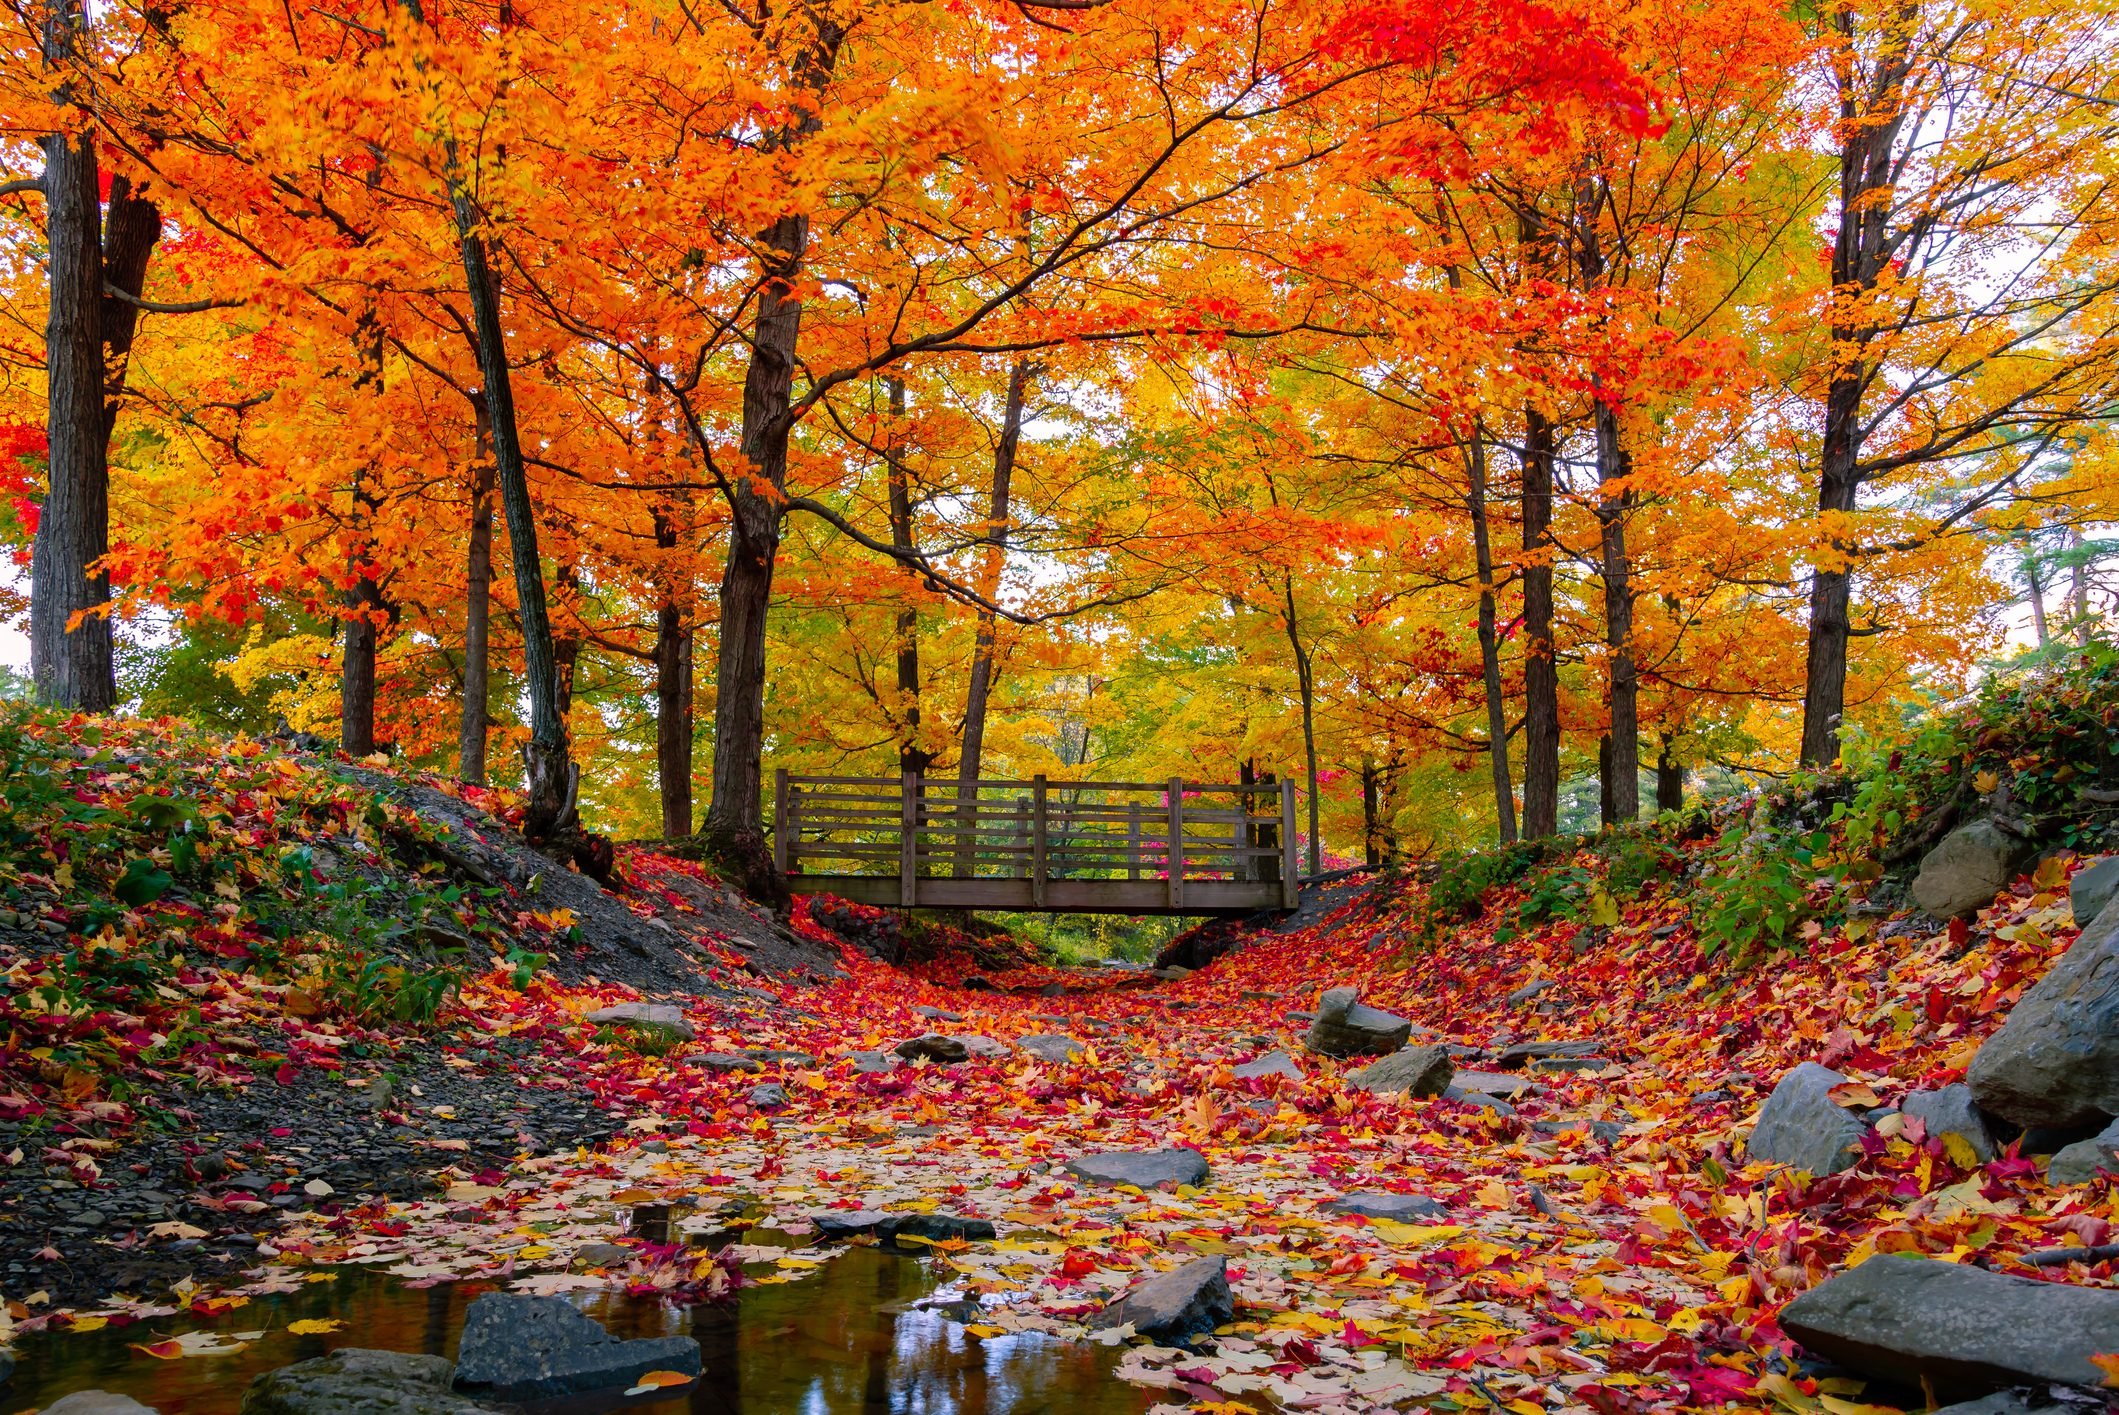 First Day of Fall Fun Facts About the Fall Equinox Reader's Digest